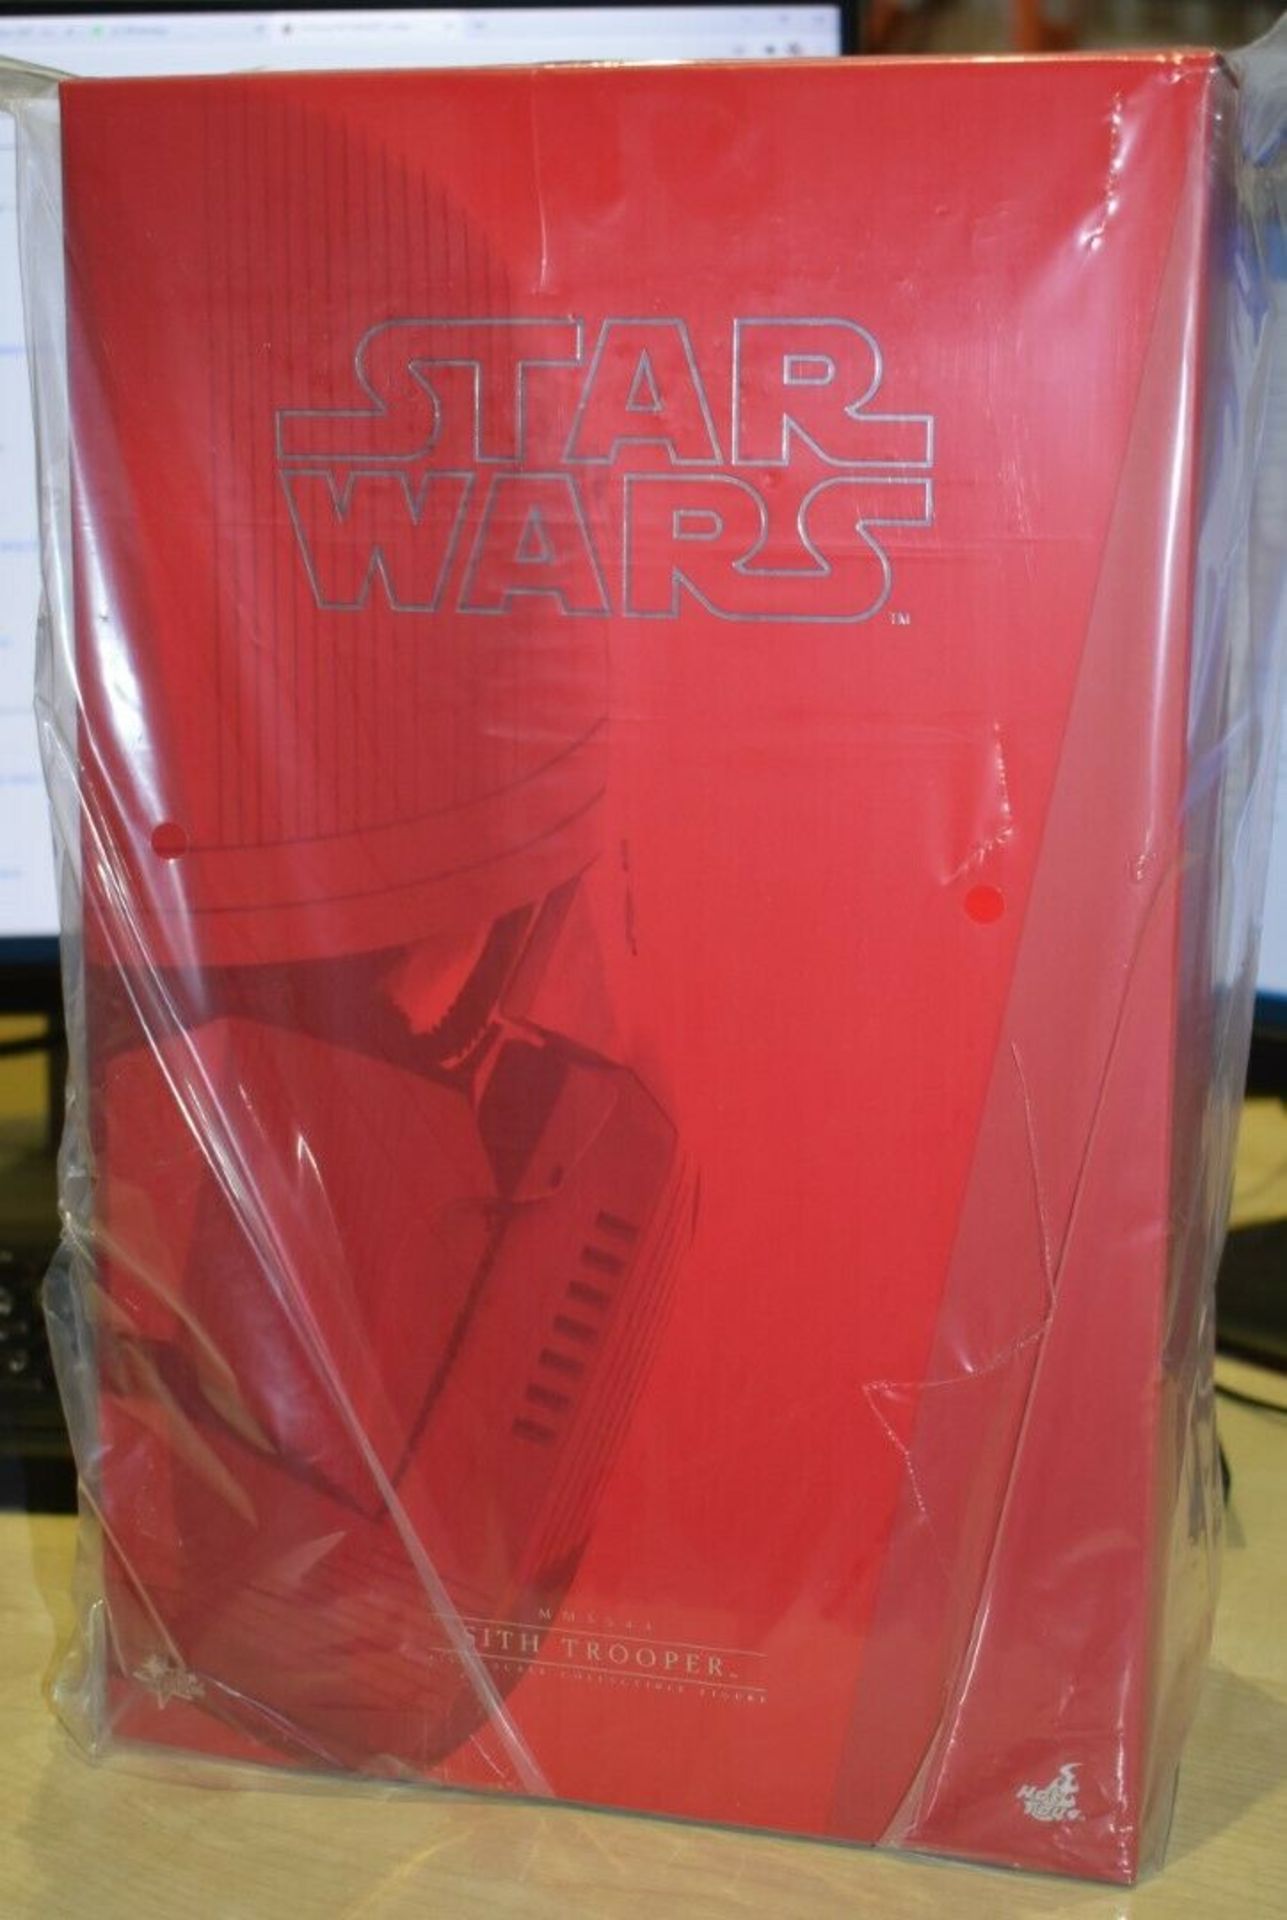 1 x Official Hot Toys Star Wars Rise of Skywalker Exclusive Sith Trooper 1/6 Scale Figure - MMS544 - - Image 2 of 3